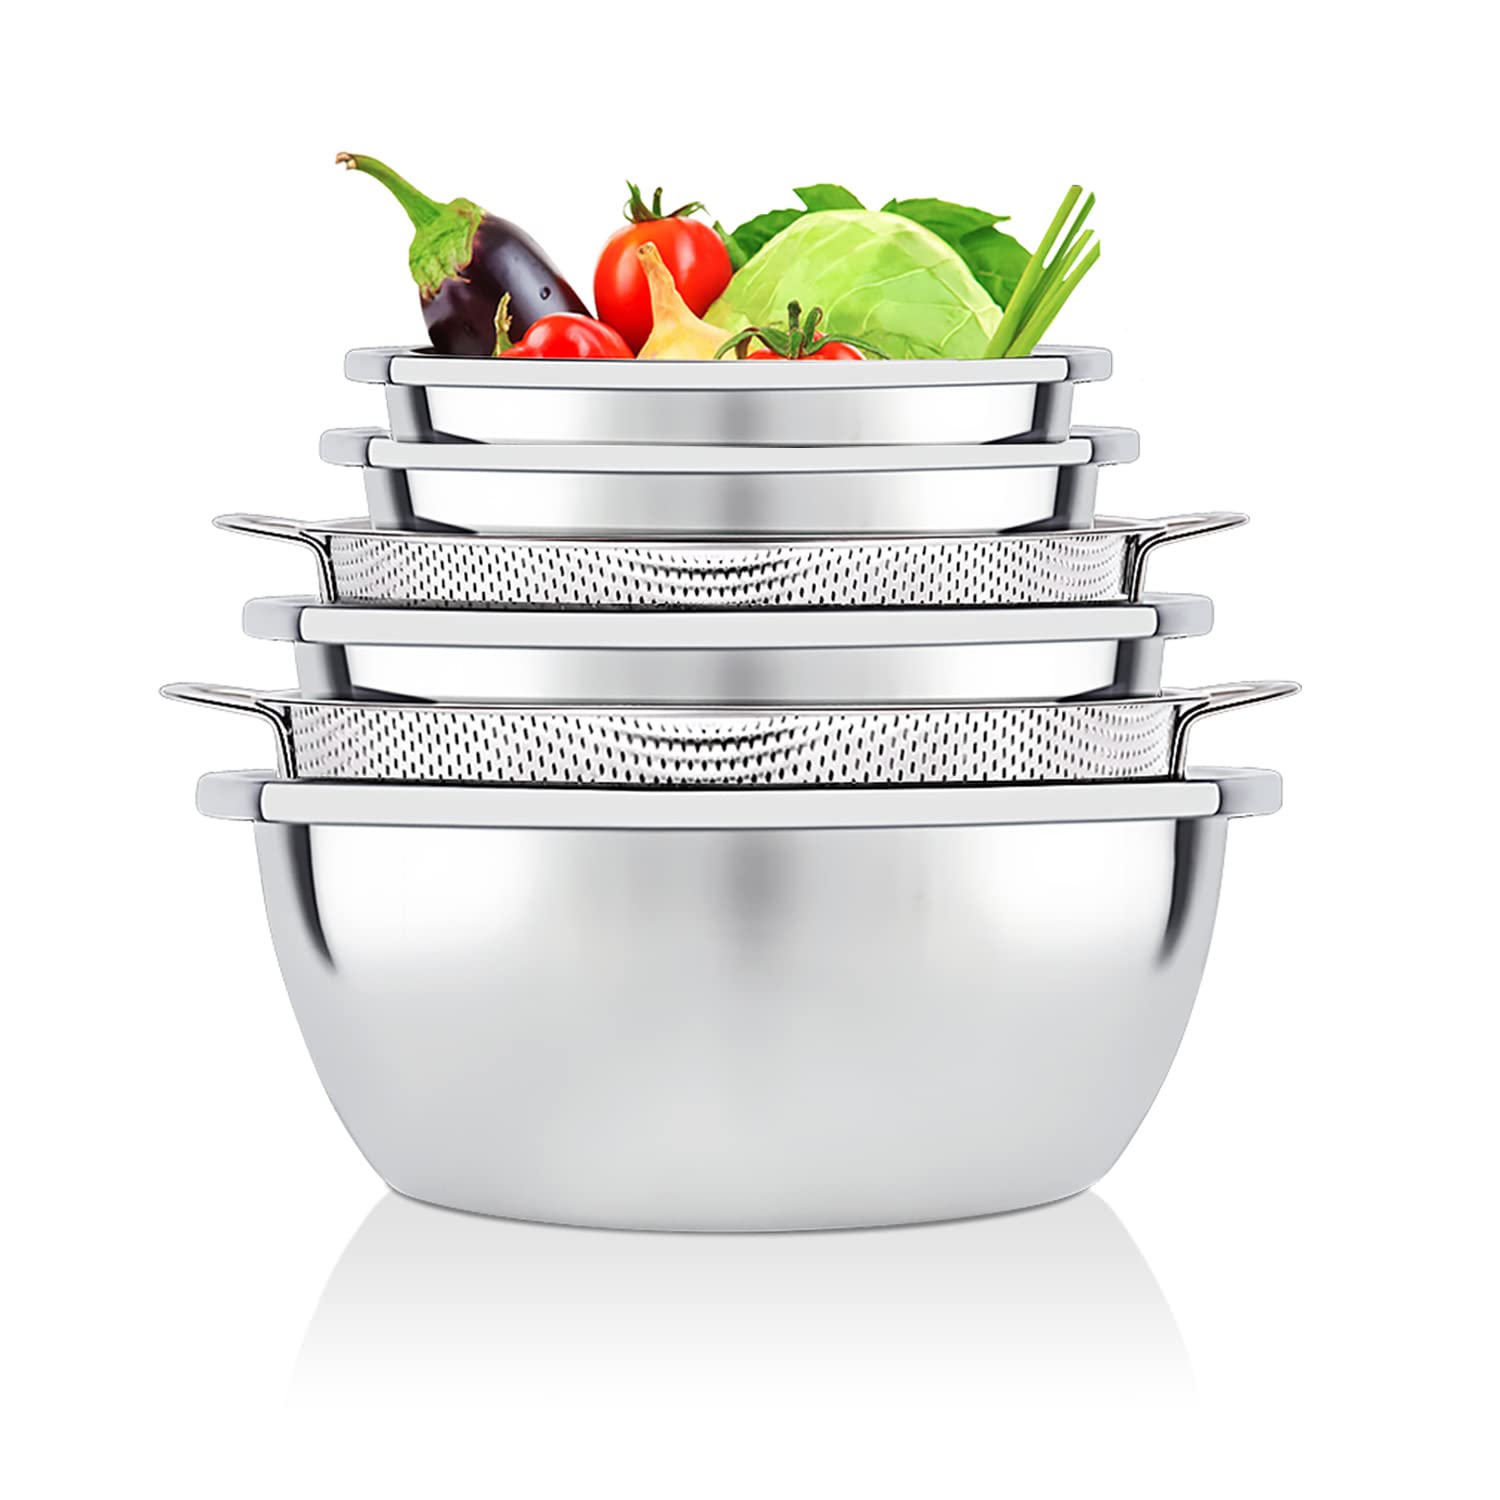 Mixing bowls and colanders, basic kitchen utensils in foodservice